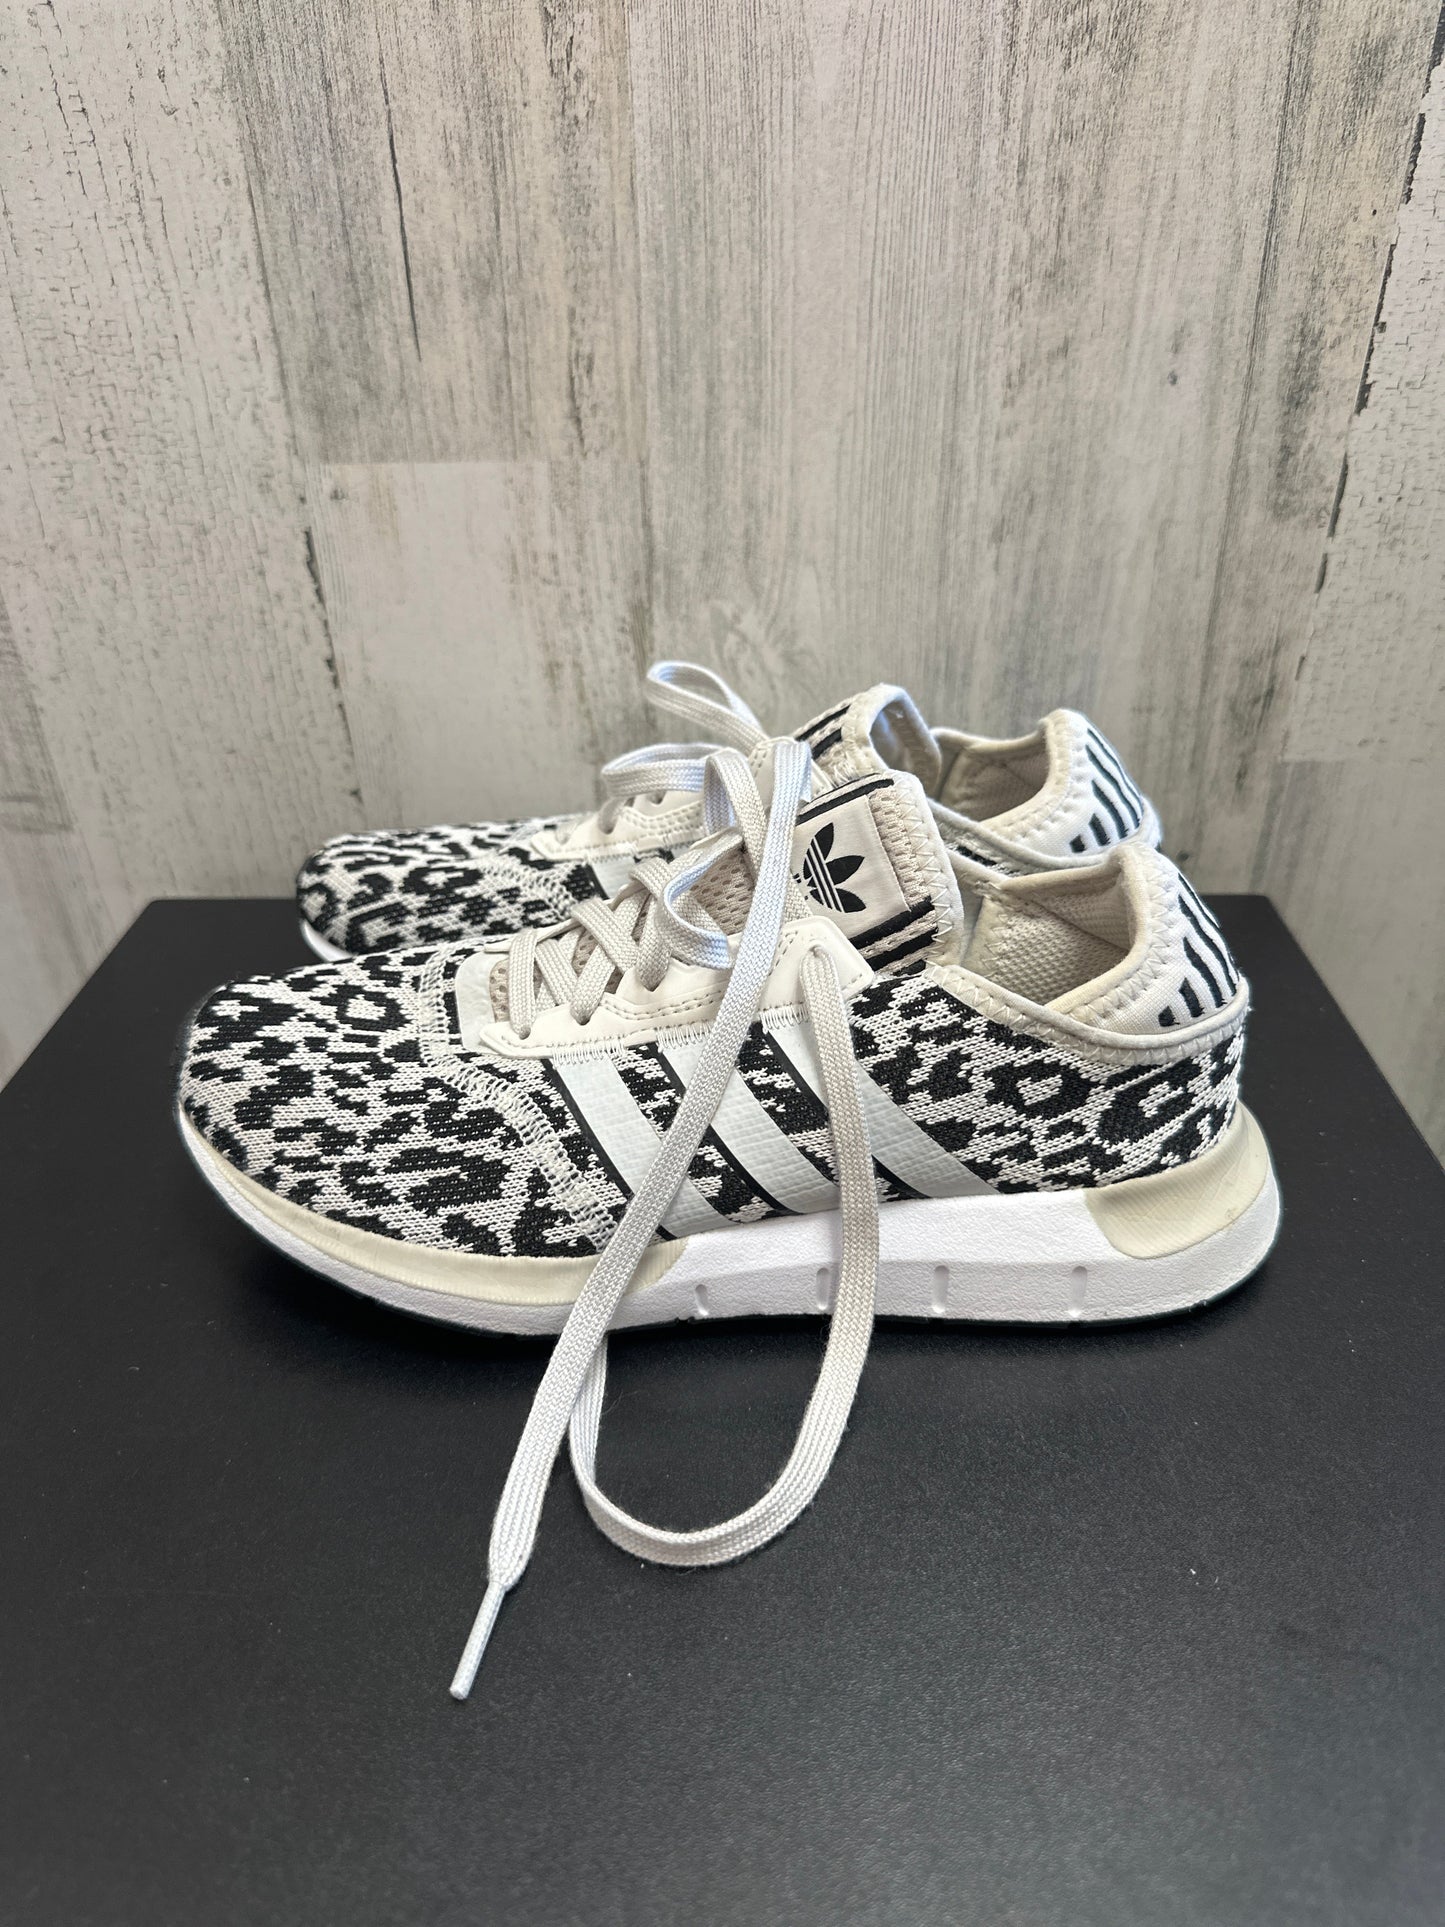 Animal Print Shoes Sneakers Adidas, Size 6